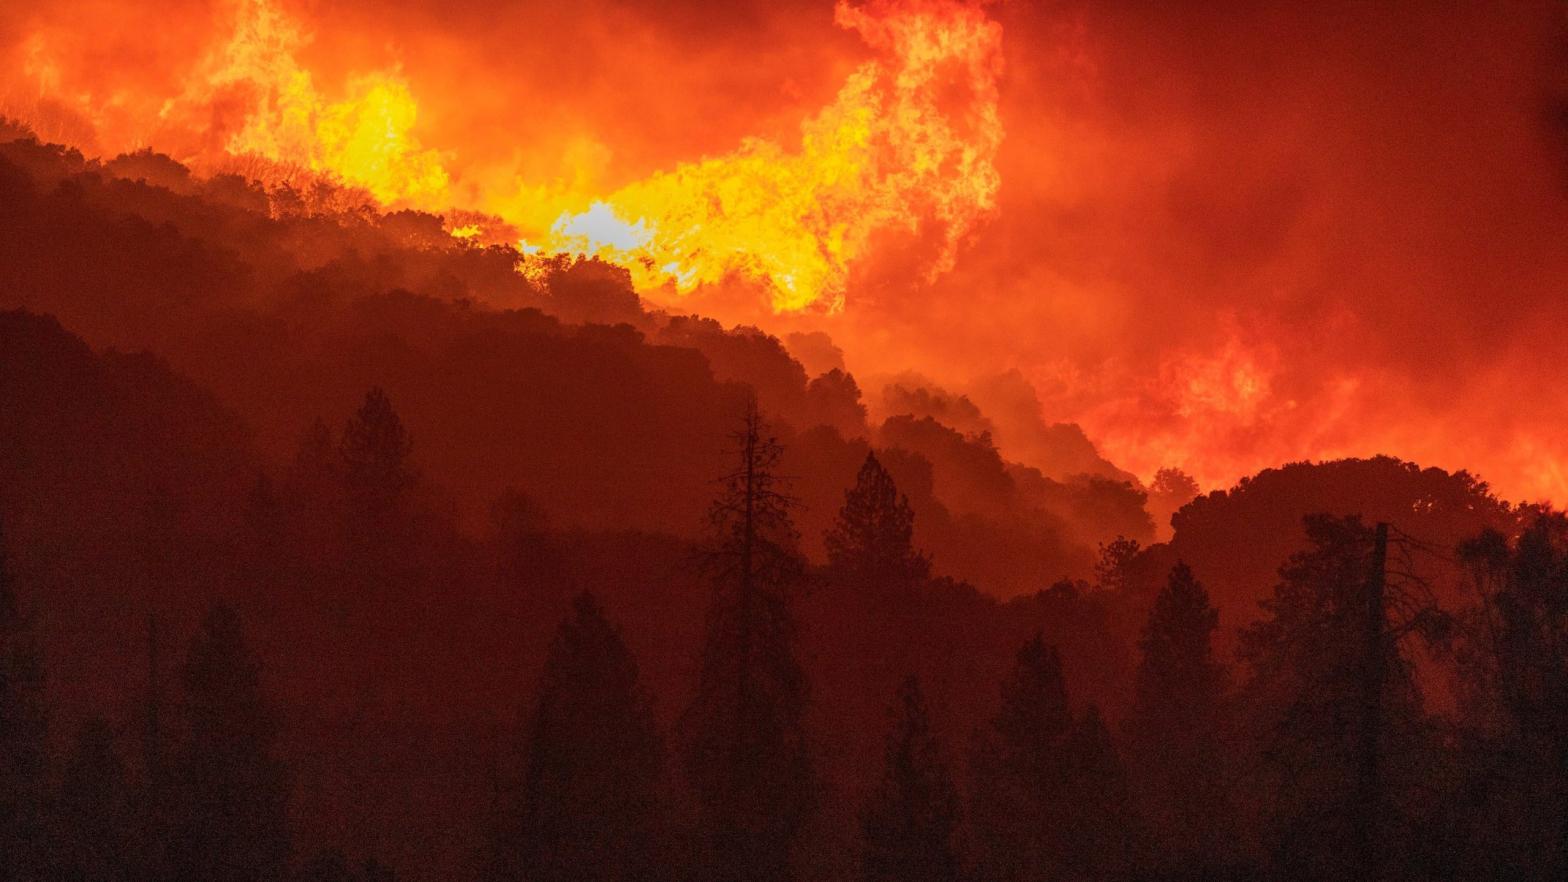 Flames incinerate a forest as the Creek Fire rapidly expands on Sept. 8, 2020 near Shaver Lake, California. (Photo: David McNew, Getty Images)